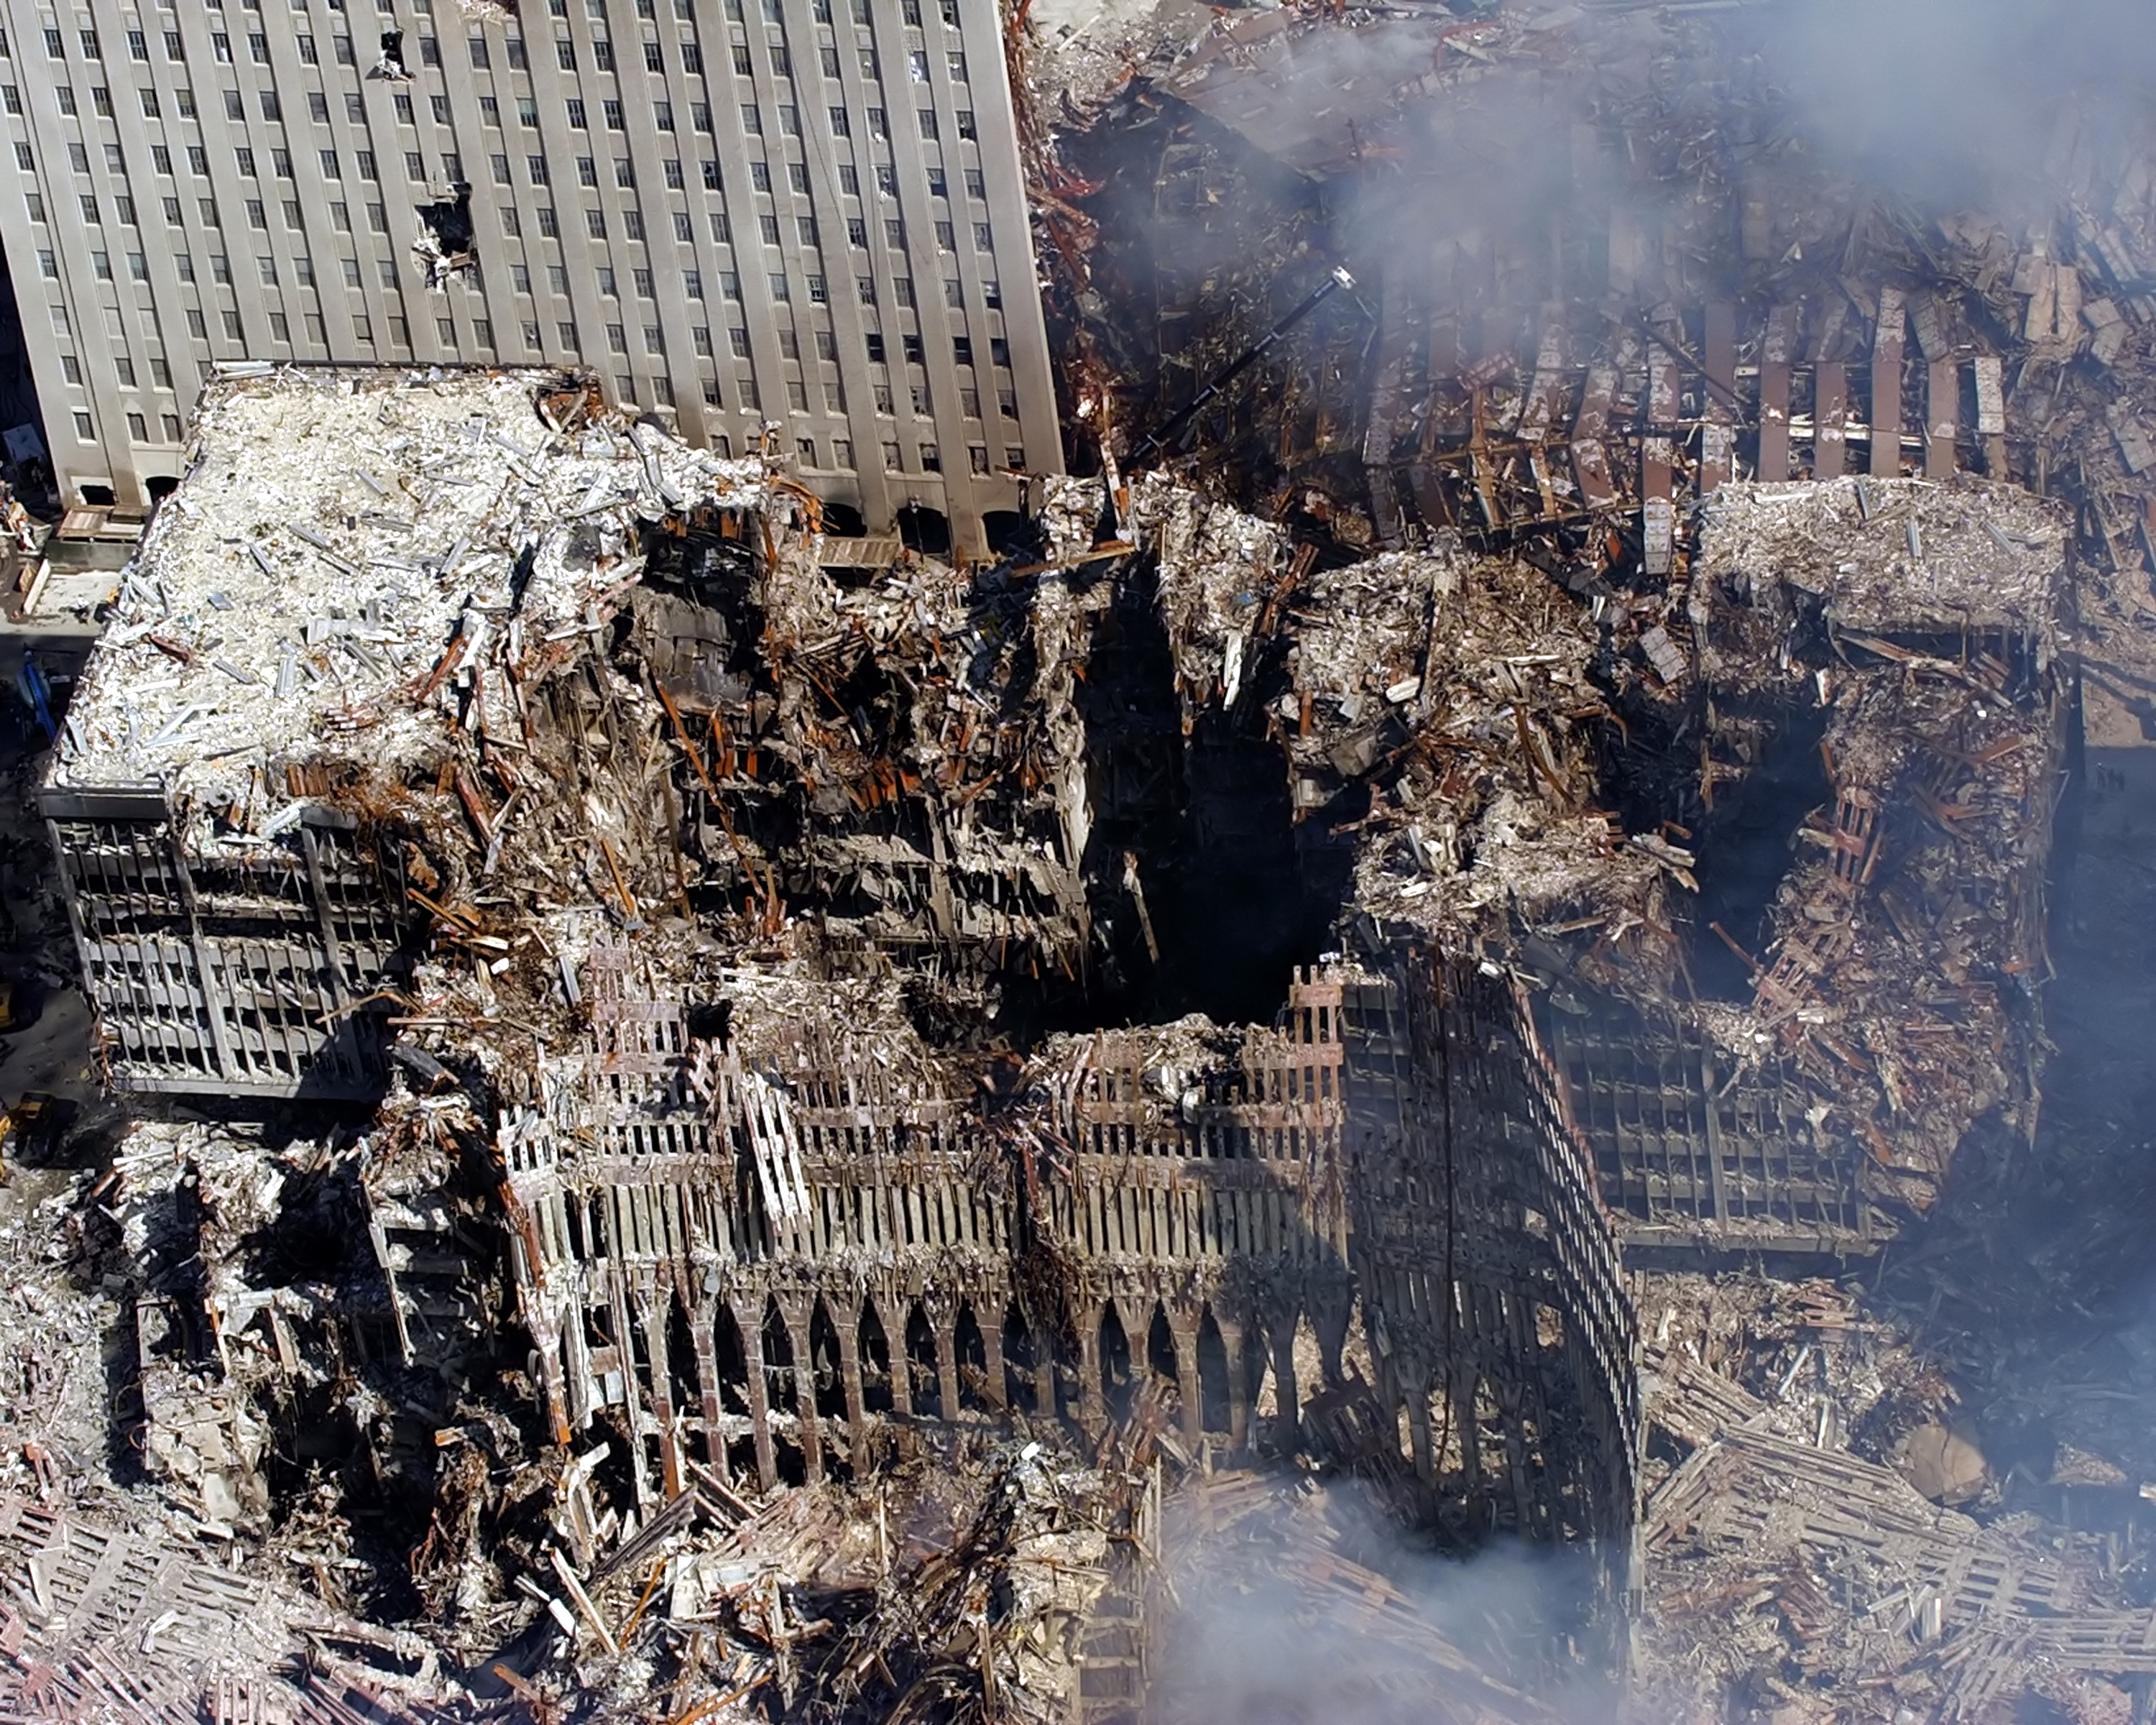 All 3 WTC Towers Collapsed Due to Controlled Demolition, Concludes Physics Magazine